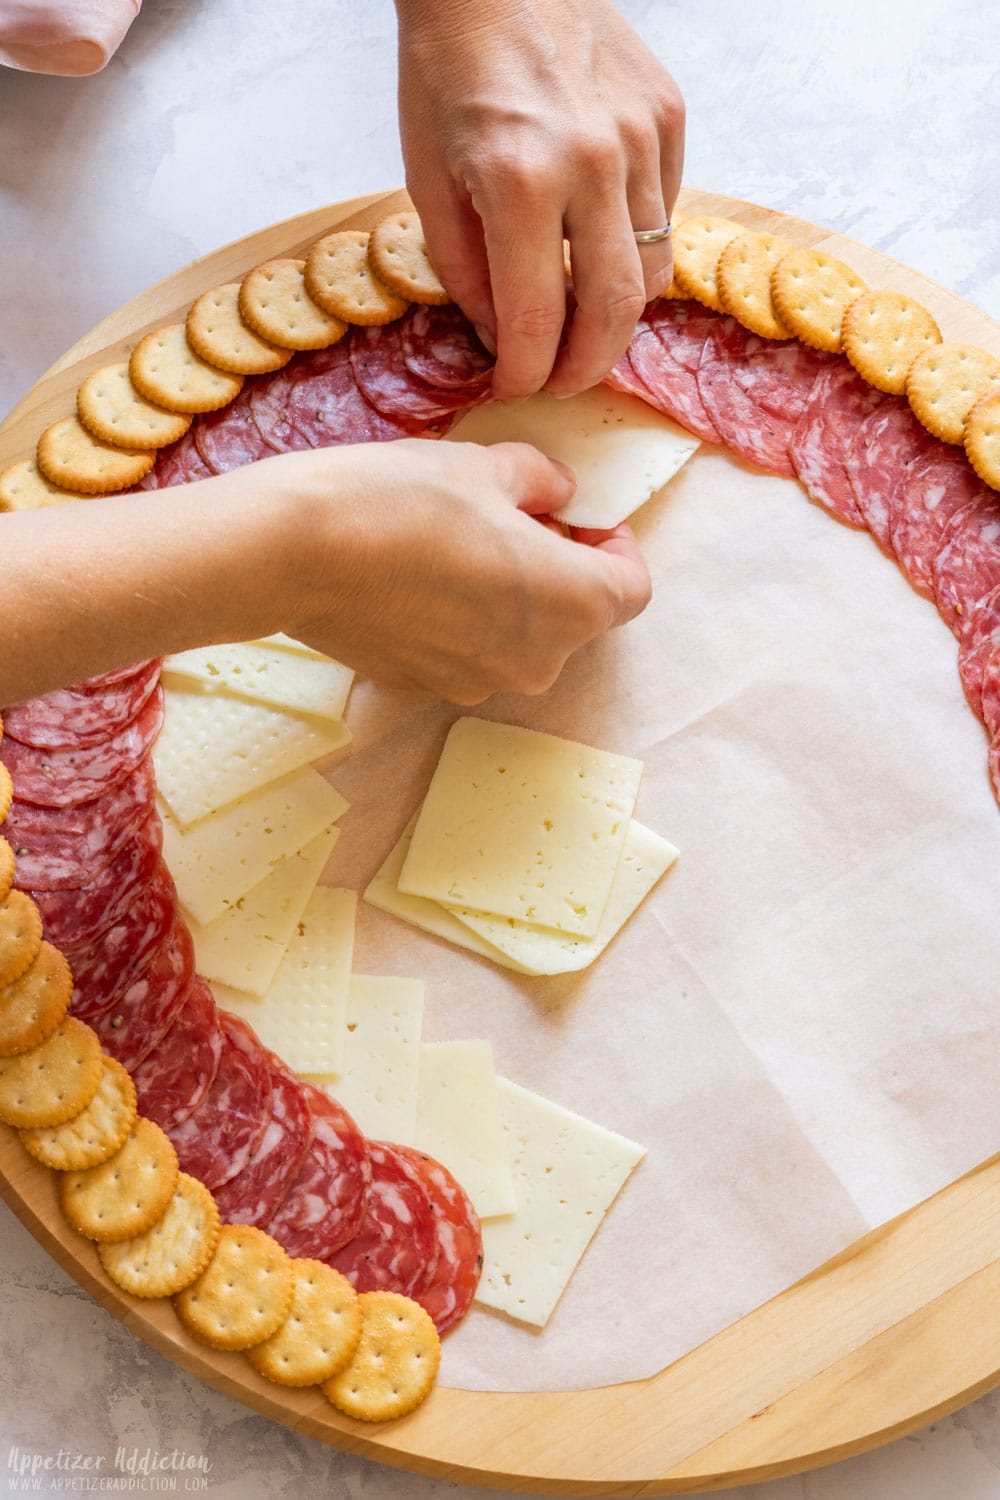 Placing the sliced cheese under the salami slices.